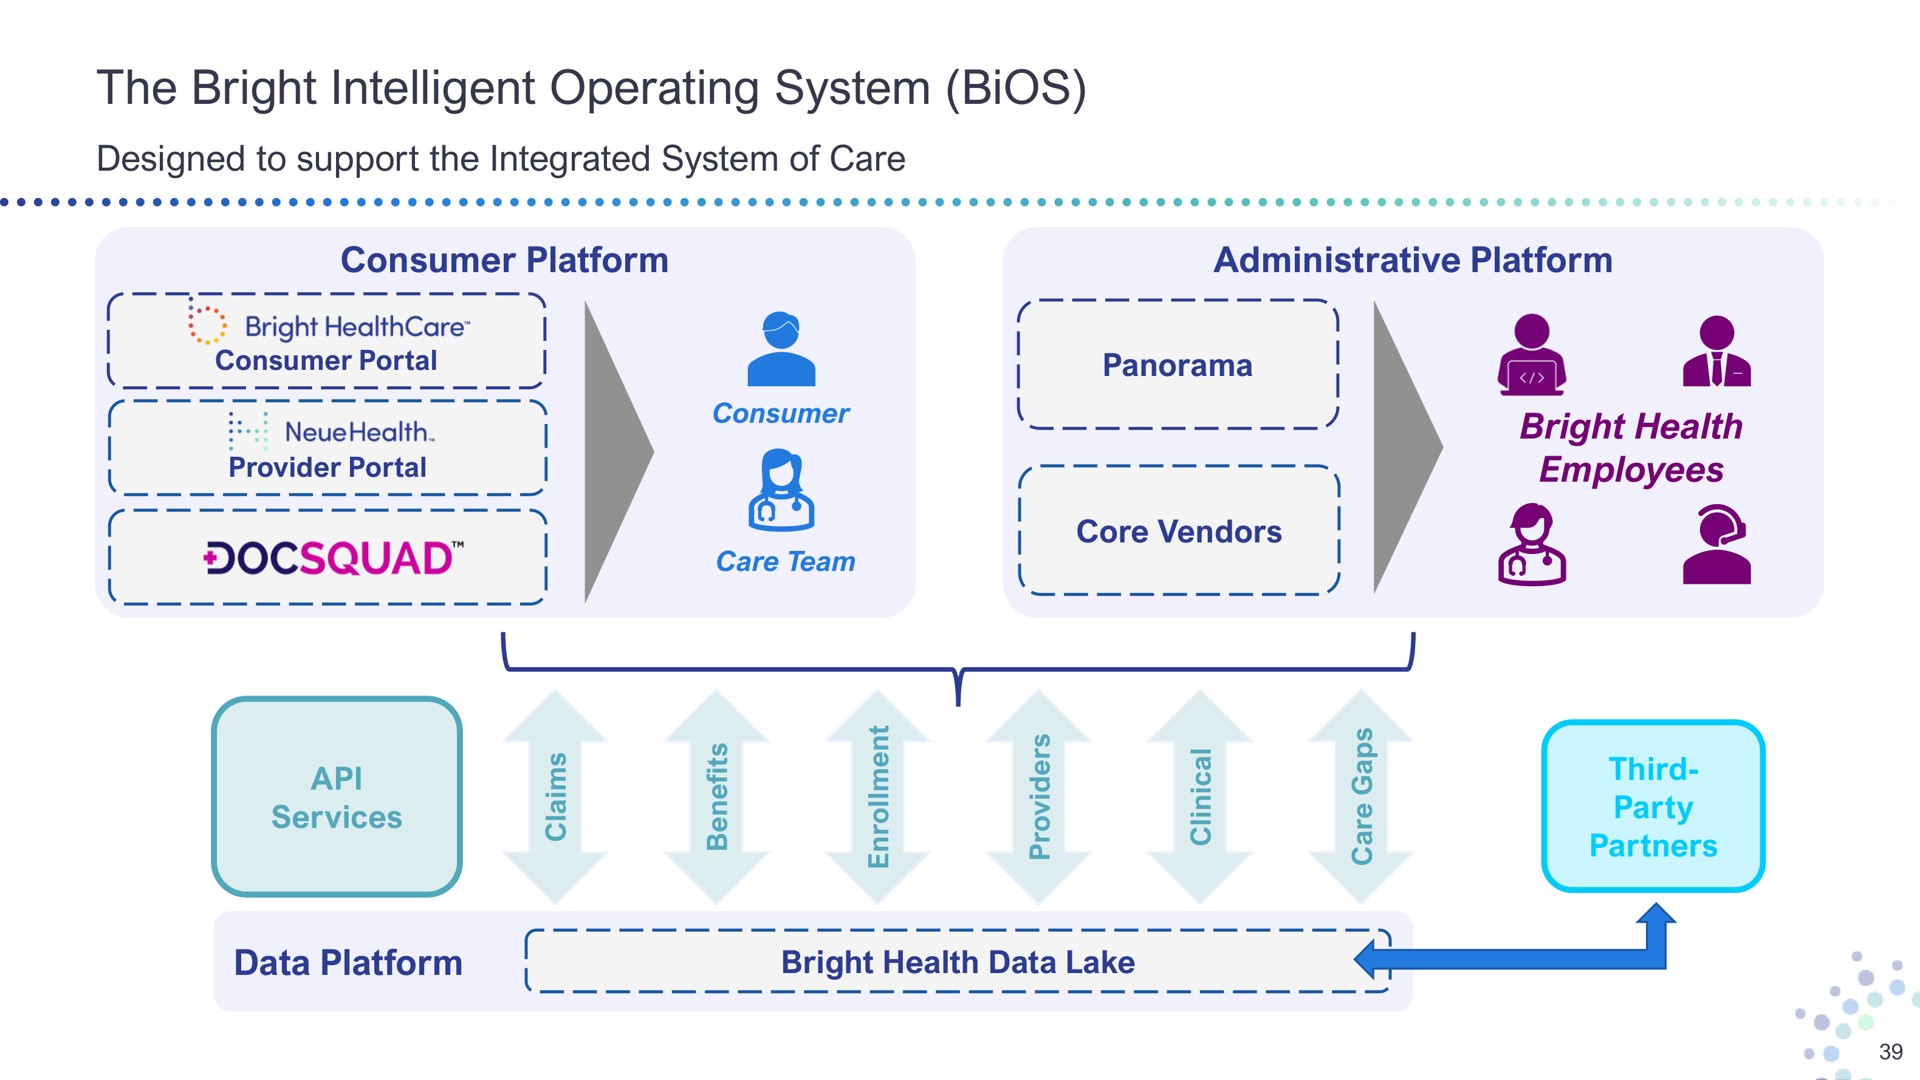 the bright intelligent operating system bios designed to support integrated of care consumer platform administrative platform a a a a porta provider portal a consul a vend core aid health employees services i a data platform health data lake third party partners ell | Bright Health Group